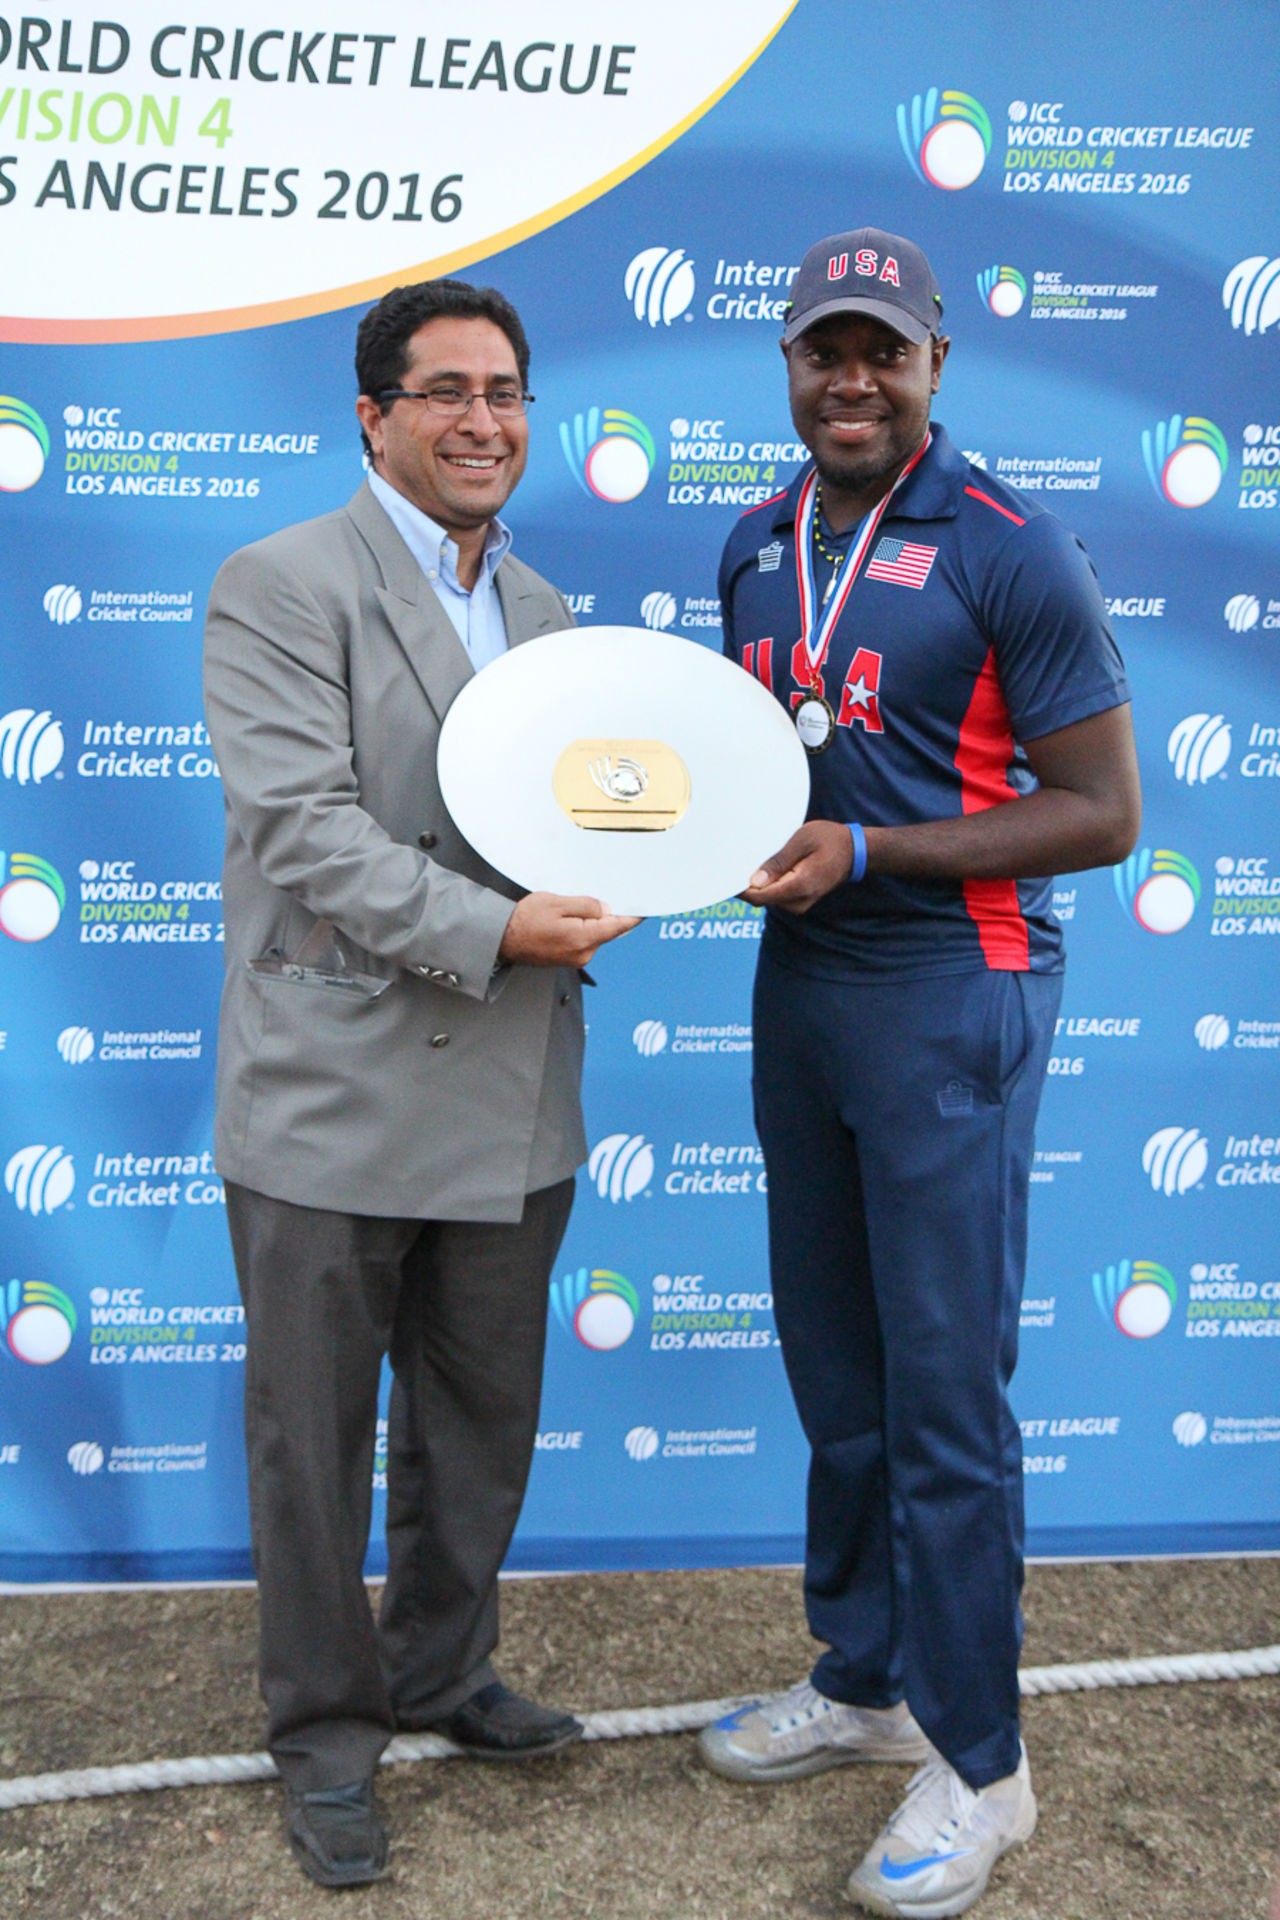 USA captain Steven Taylor accepts the WCL Division Four silver plate, USA v Oman, ICC World Cricket League Division Four Final, Los Angeles, November 5, 2016